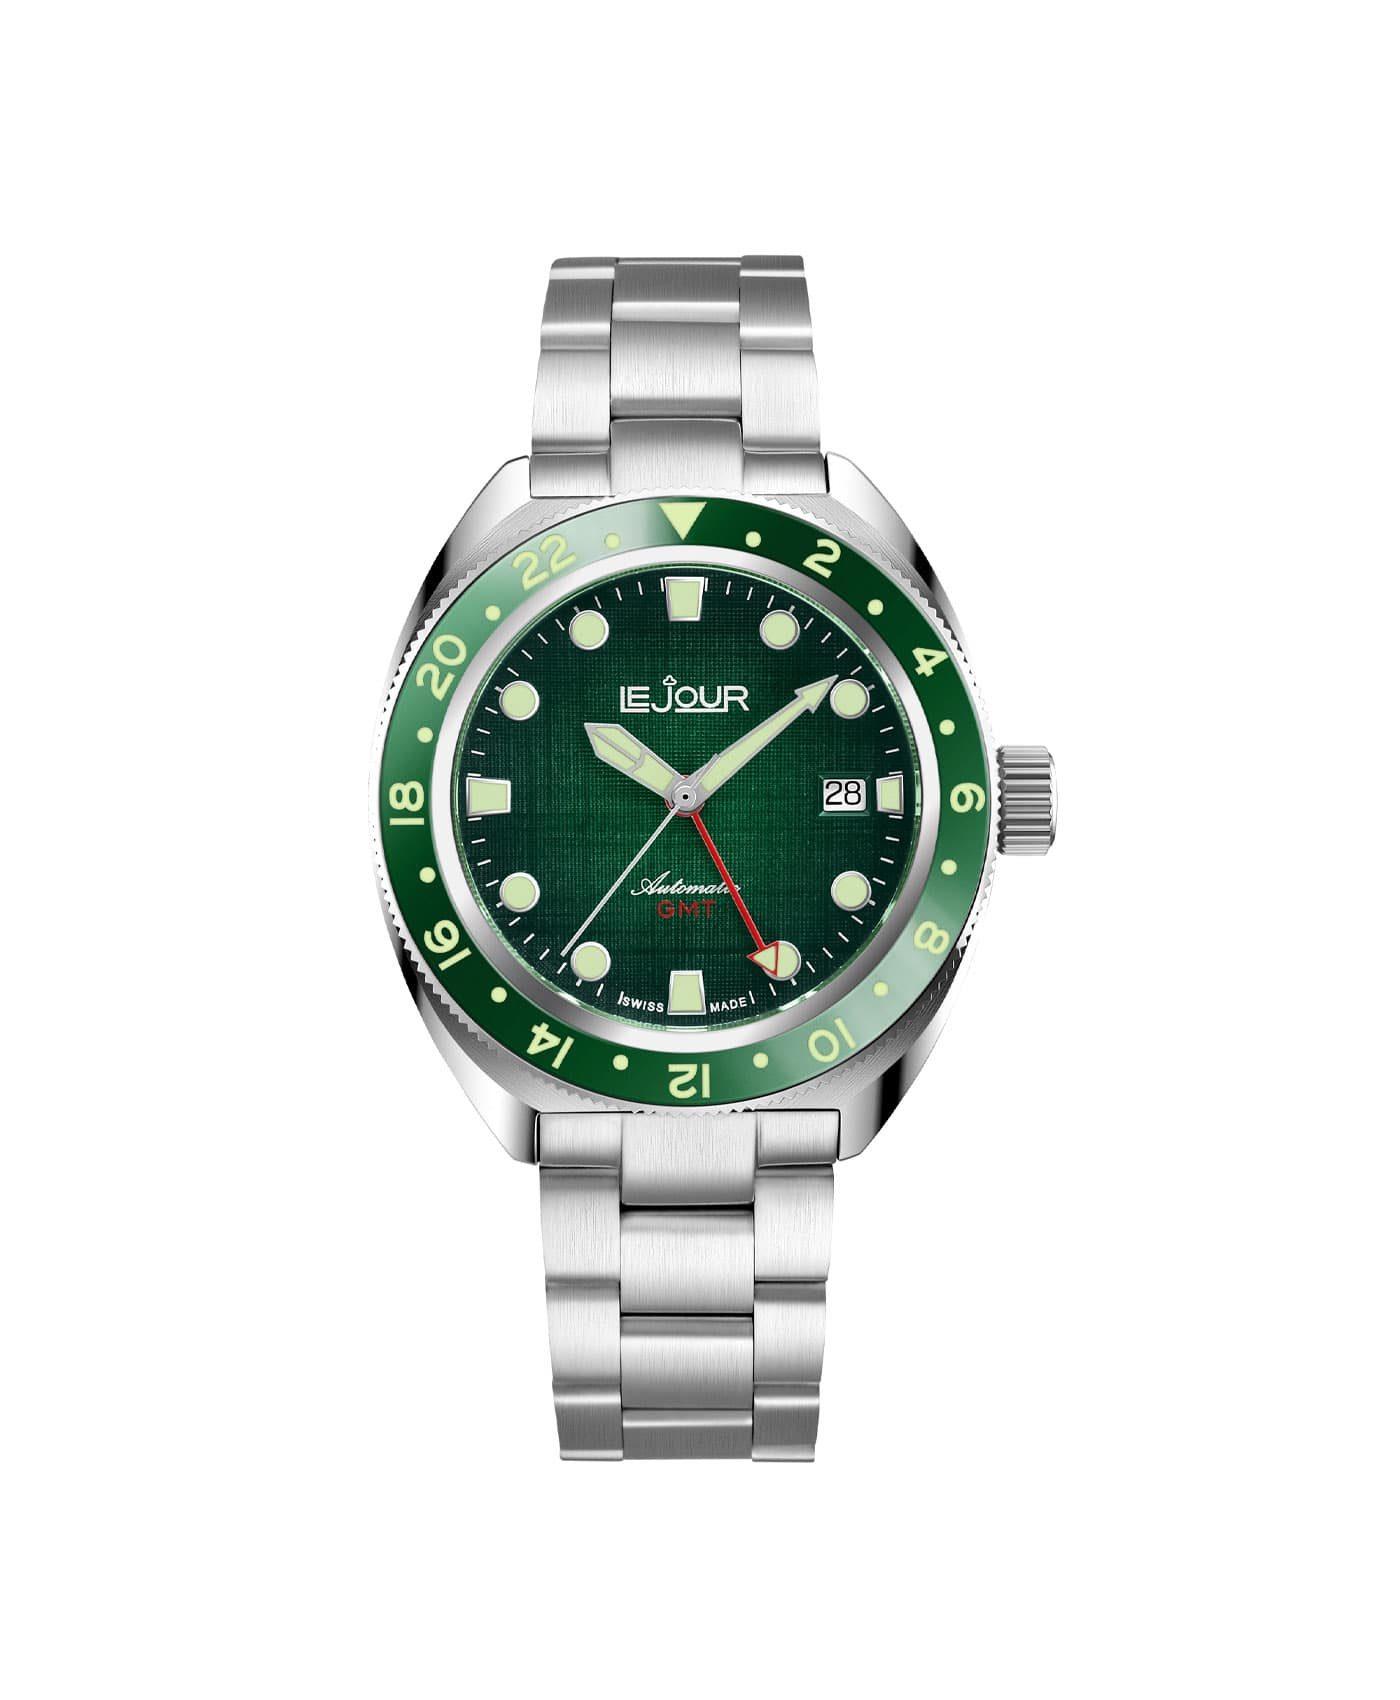 LJ-HH-GMT-003 textured green dial